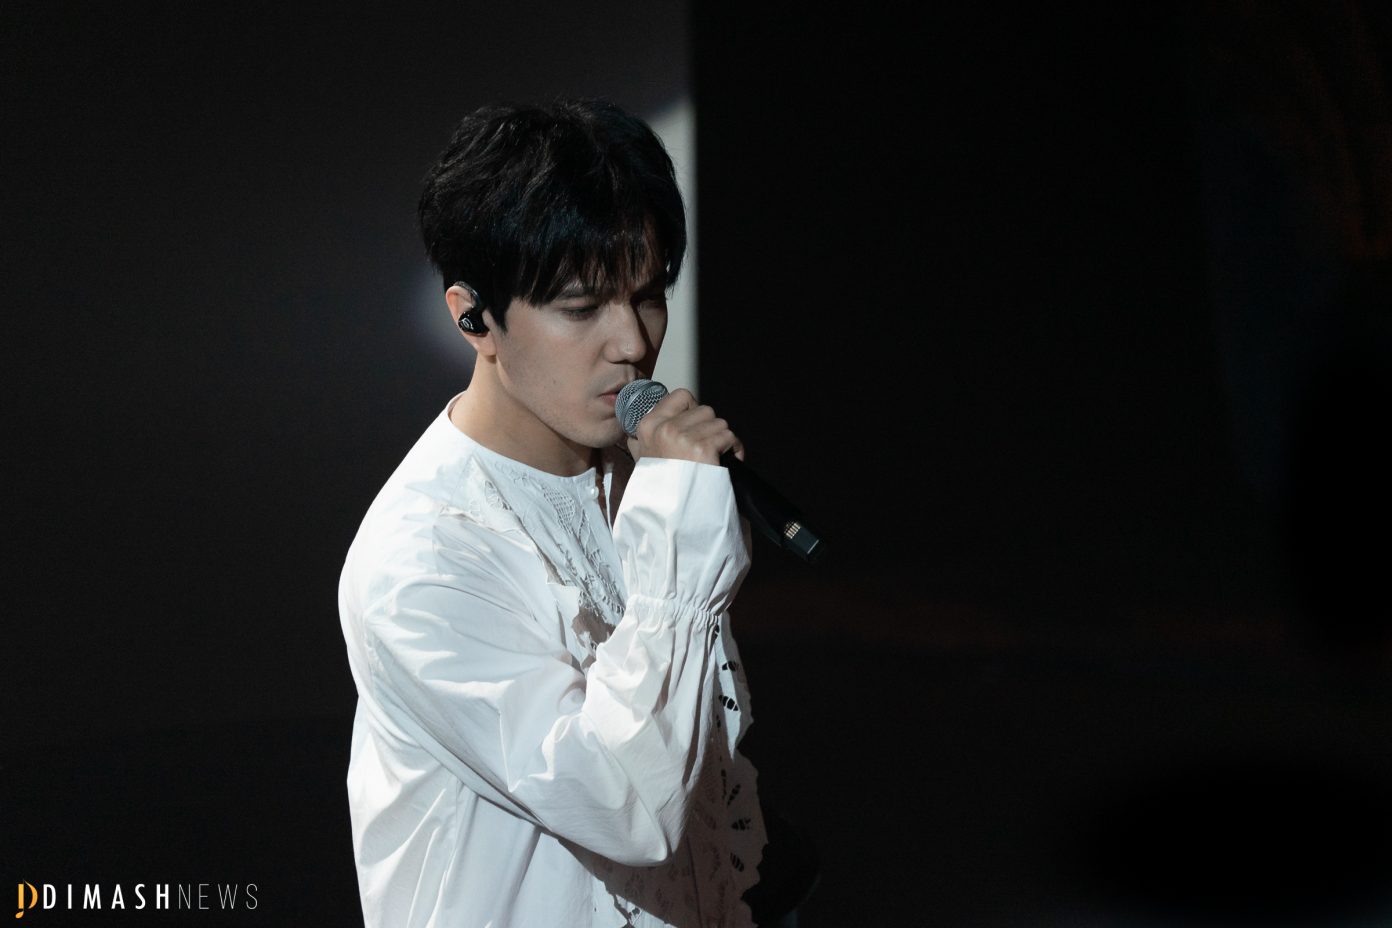 Dimash performed at the 